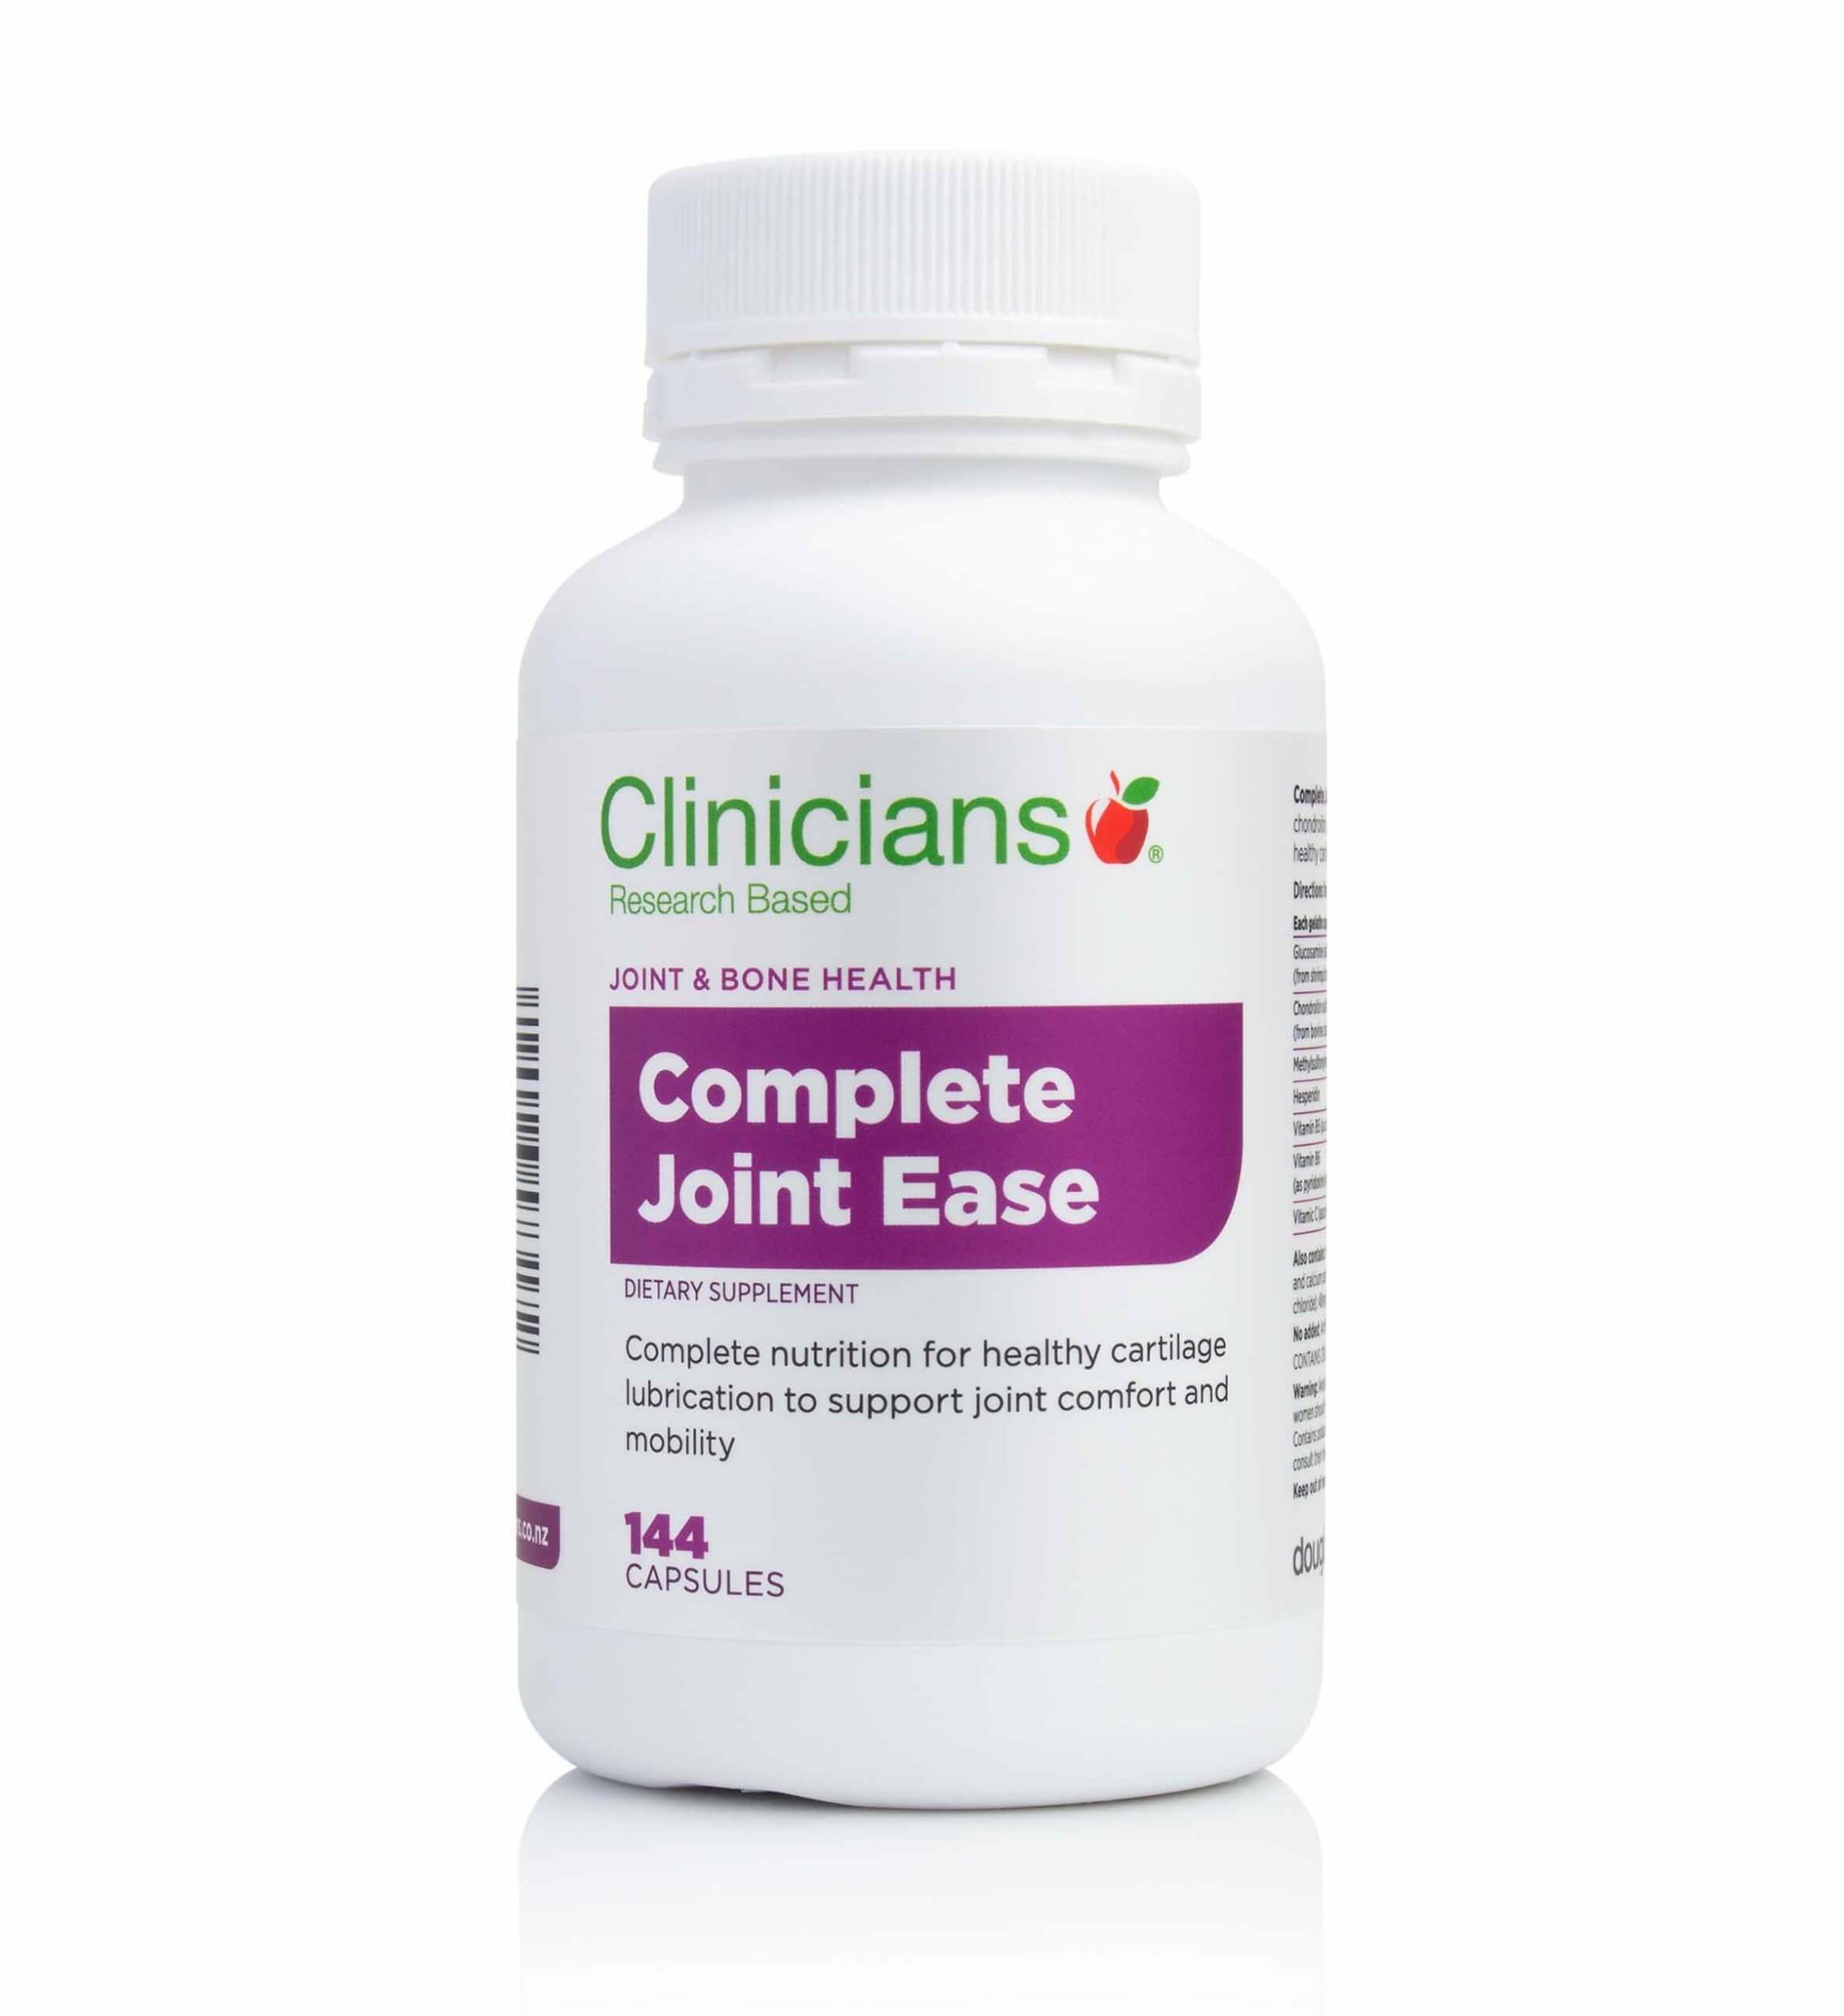 Clinicians Complete Joint Ease 144 Capsules